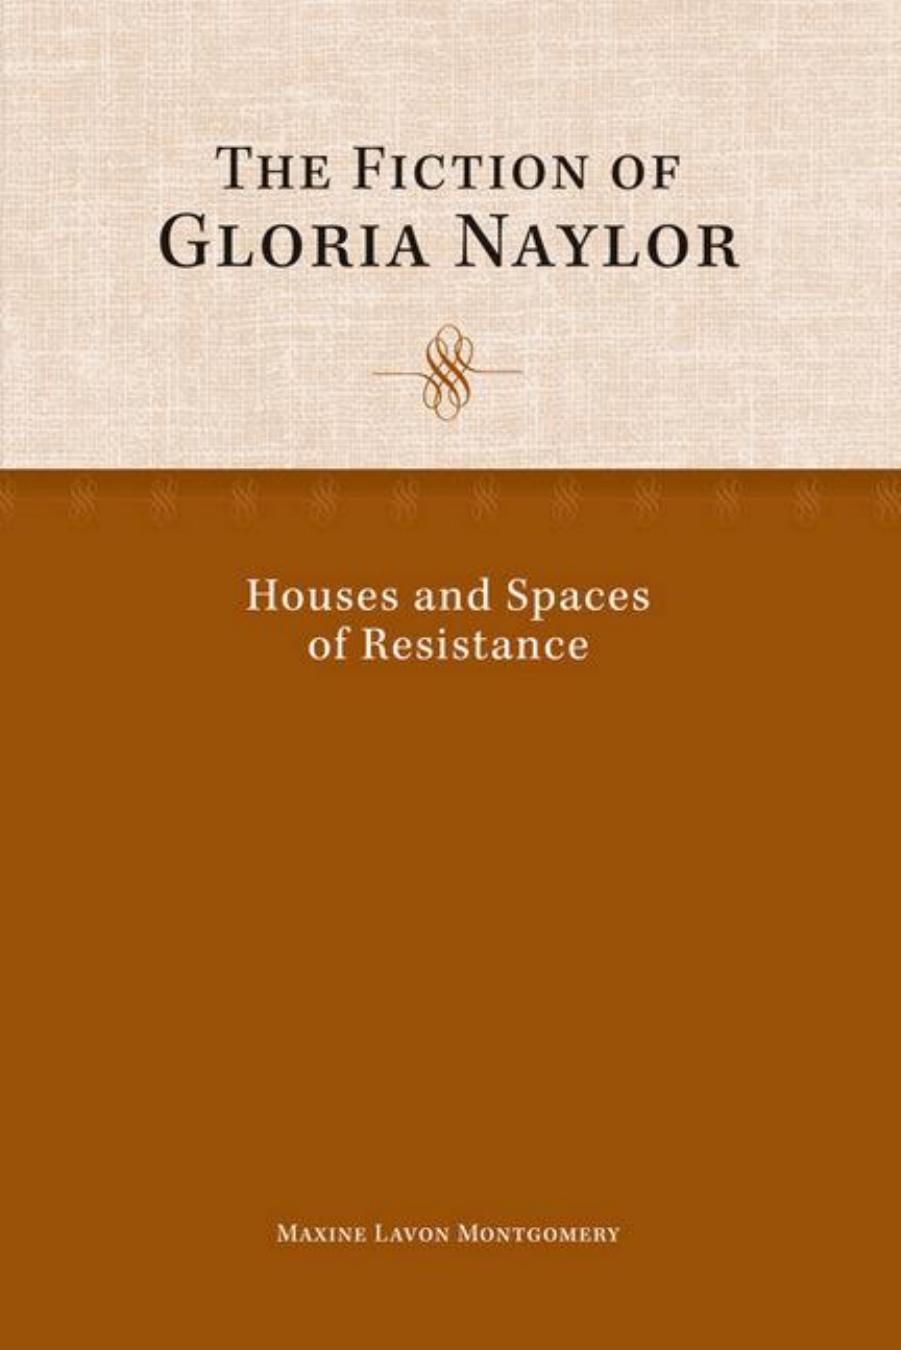 The Fiction of Gloria Naylor : Houses and Spaces of Resistance by Maxine Lavon Montgomery